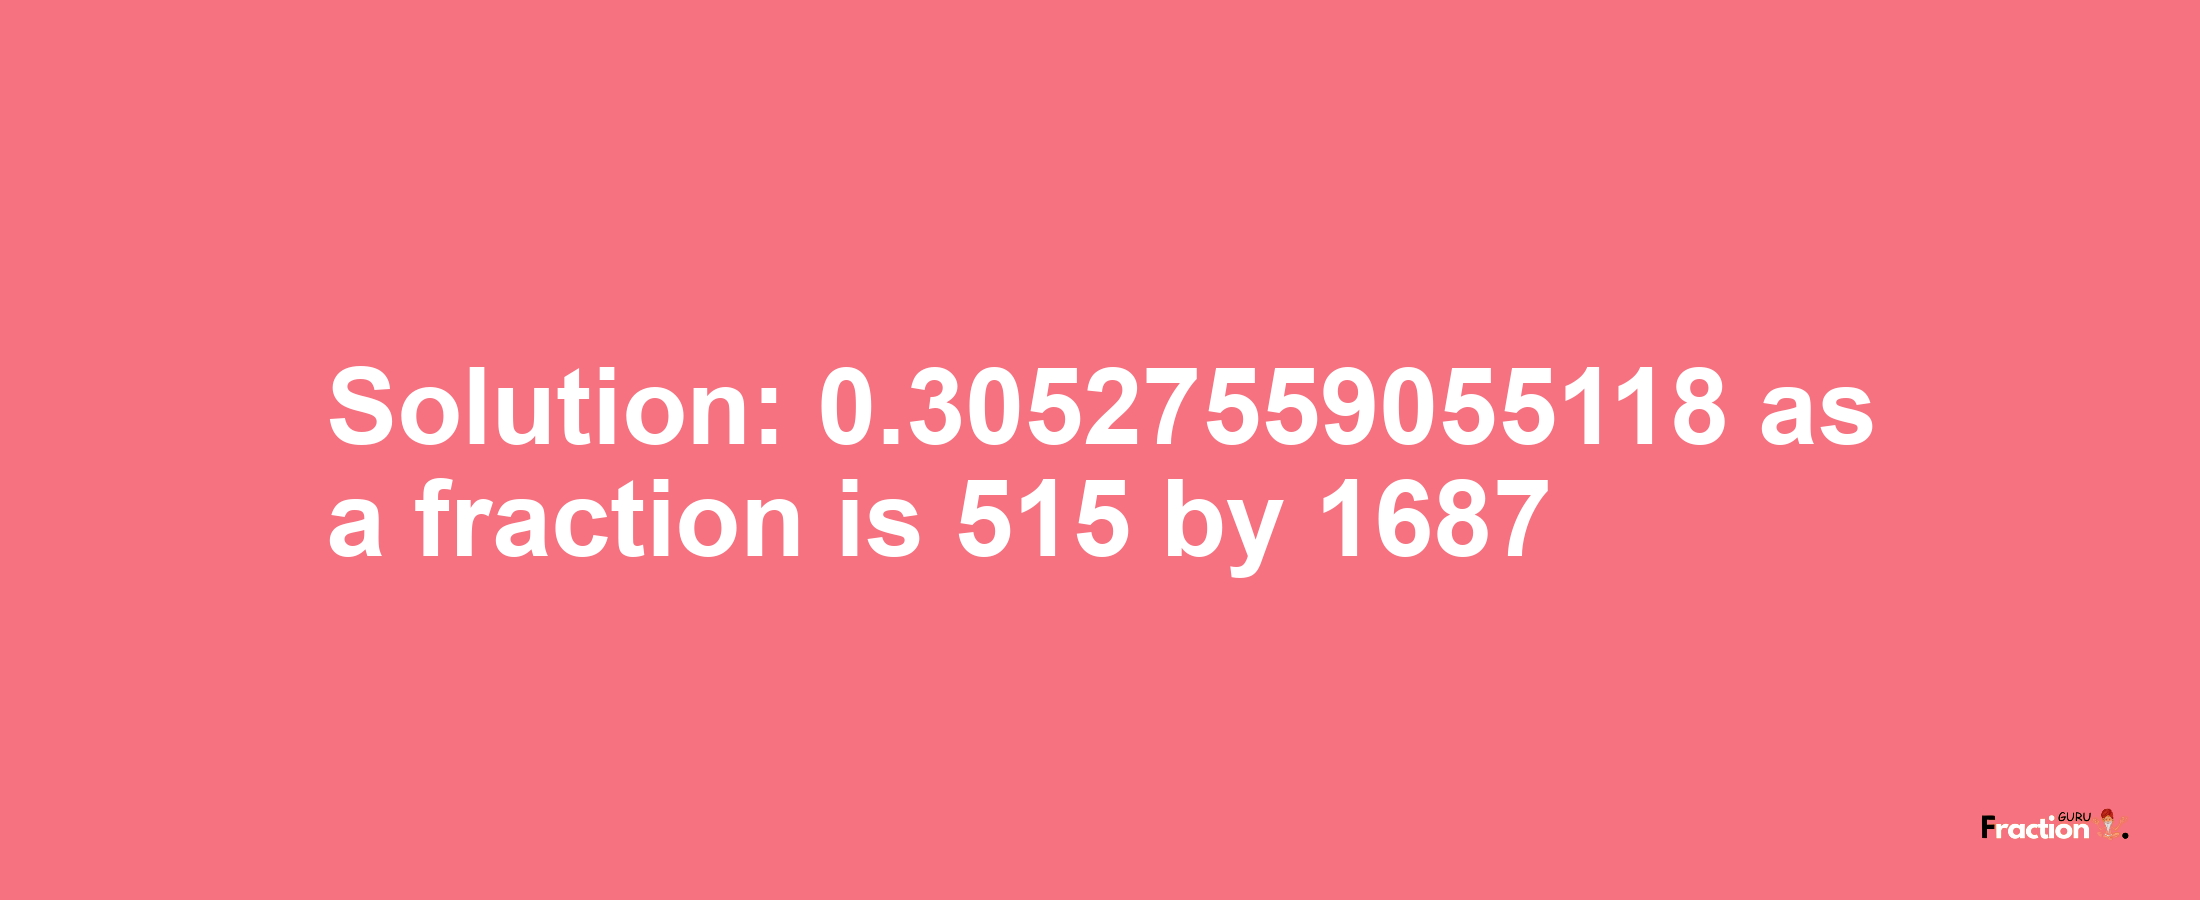 Solution:0.30527559055118 as a fraction is 515/1687